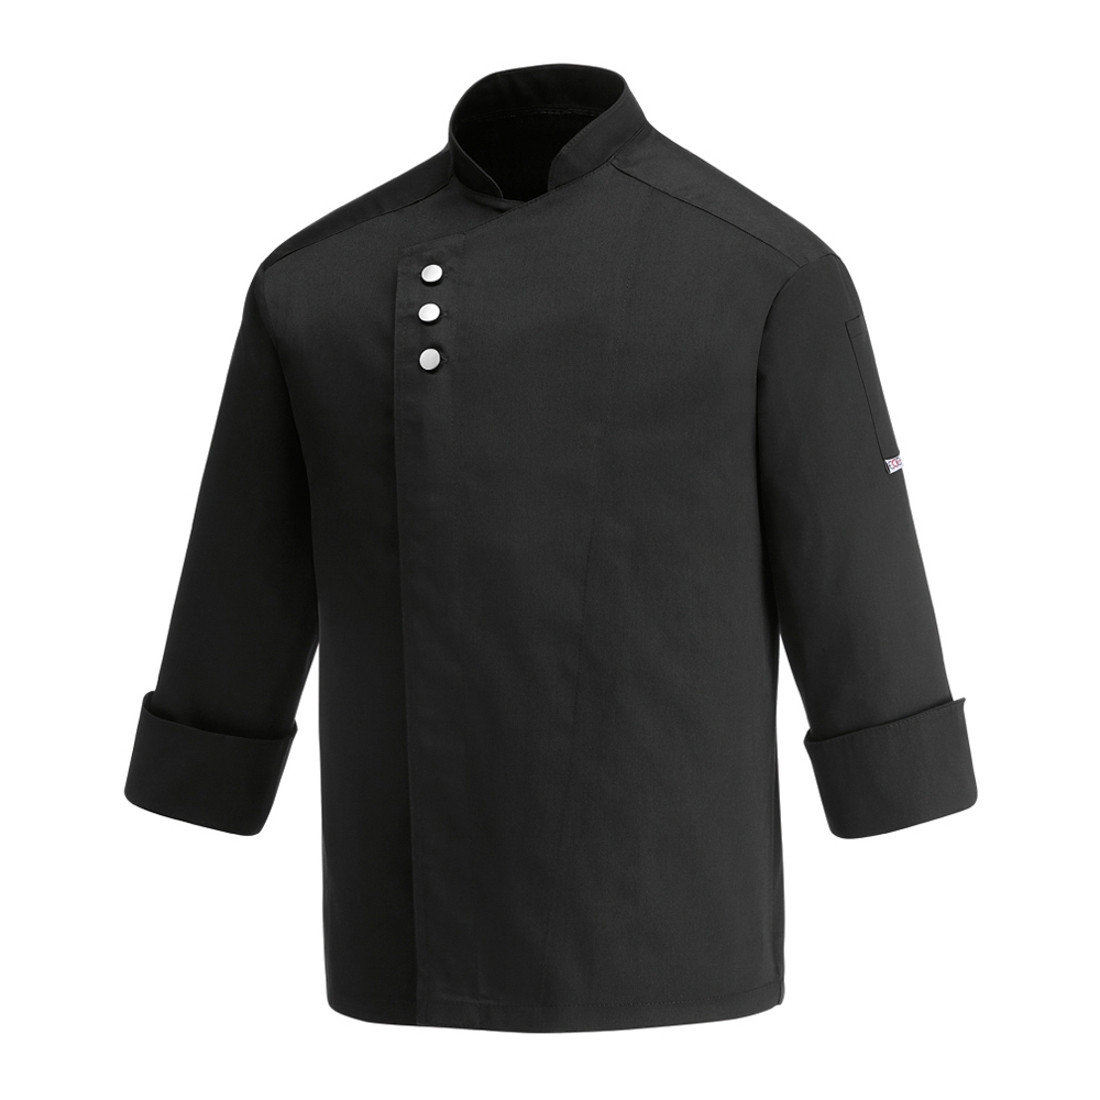 Metal Chef's Jacket, 65% polyester/35% cotton - Safetywear